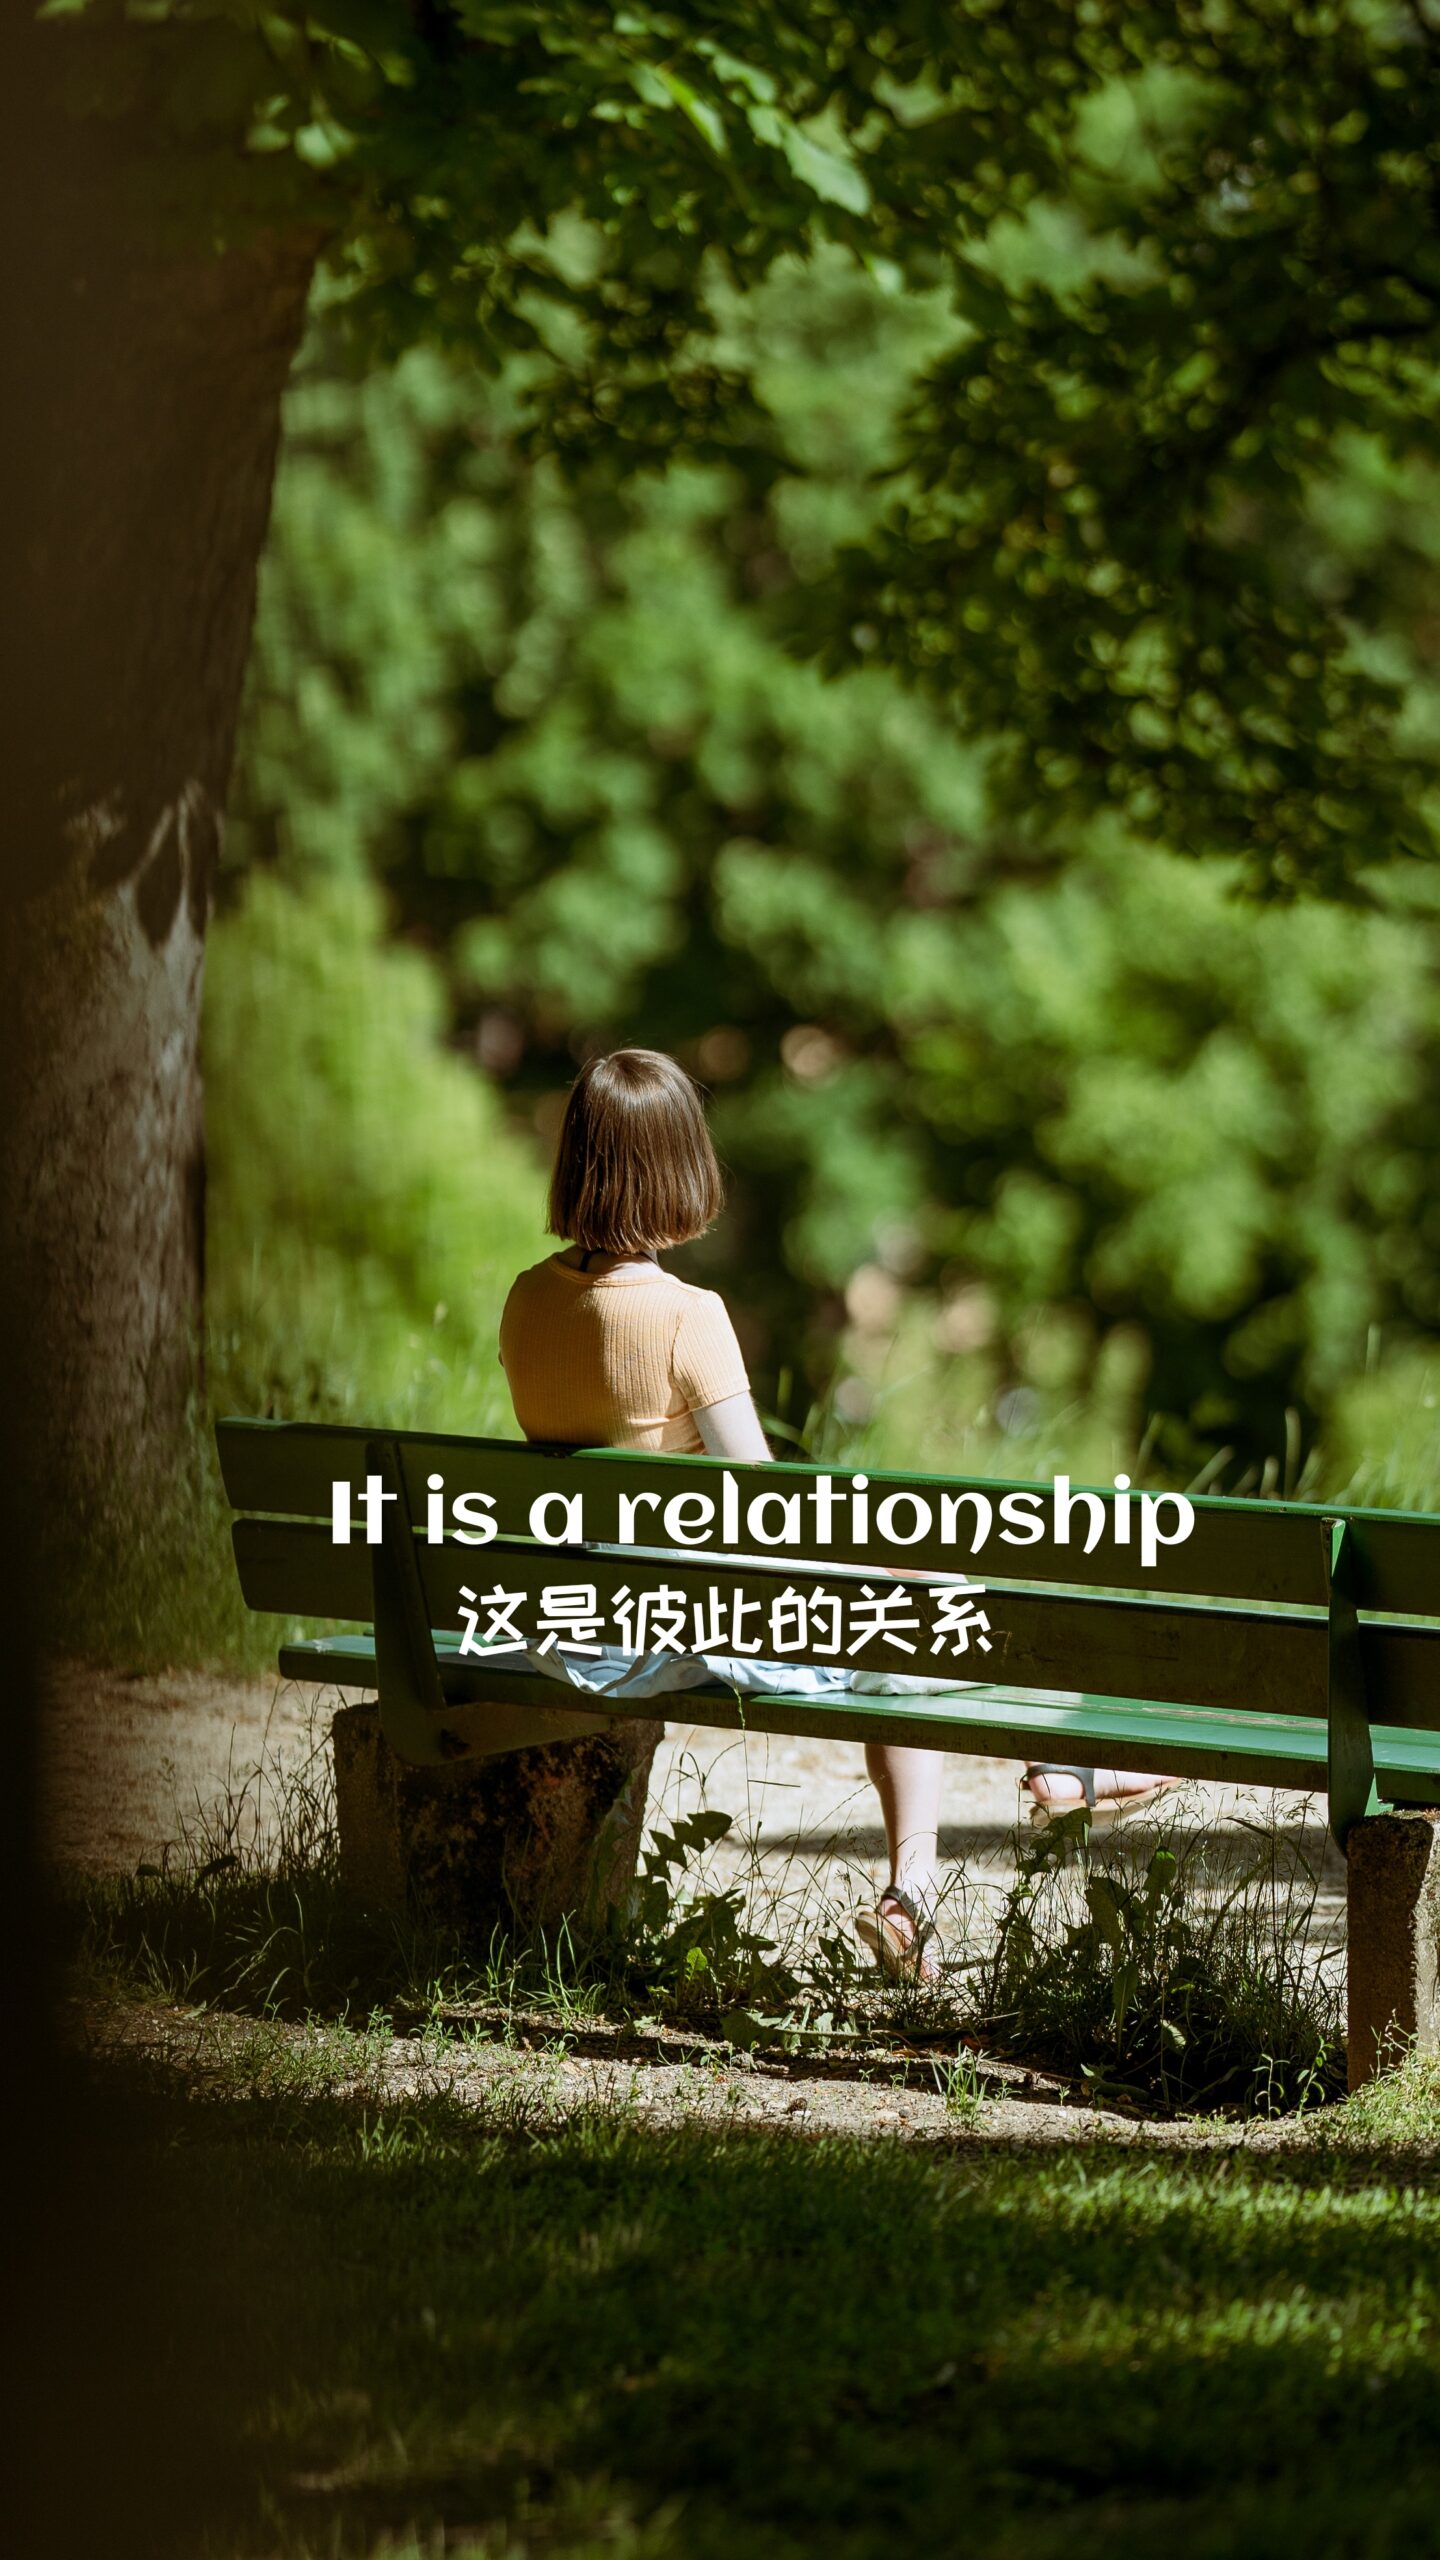 It is a relationship